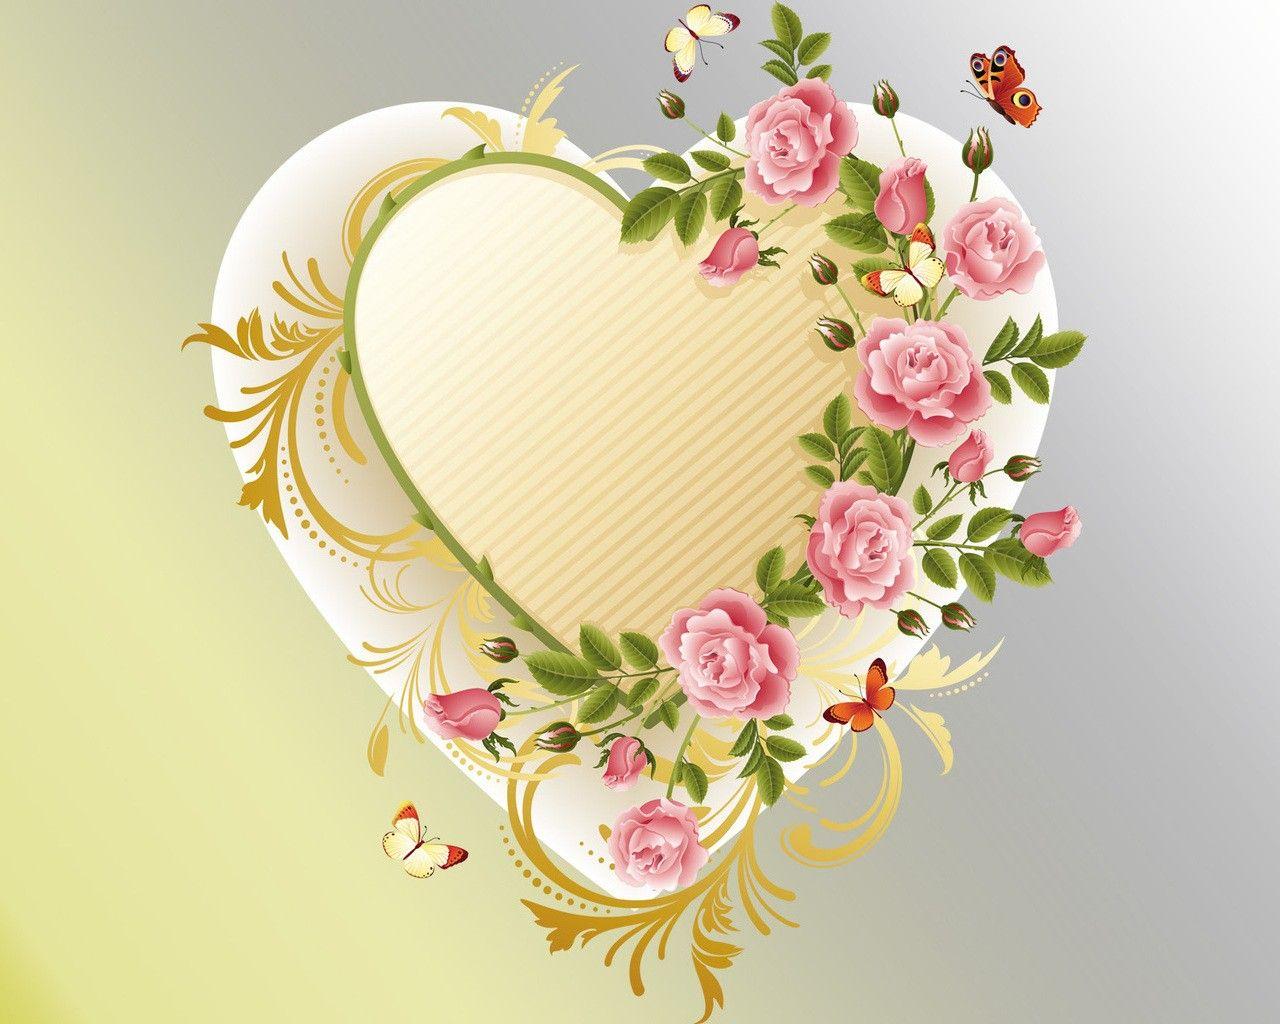 Flowers: Butterfly Flower Spring Roses Heart Flowers Colourful